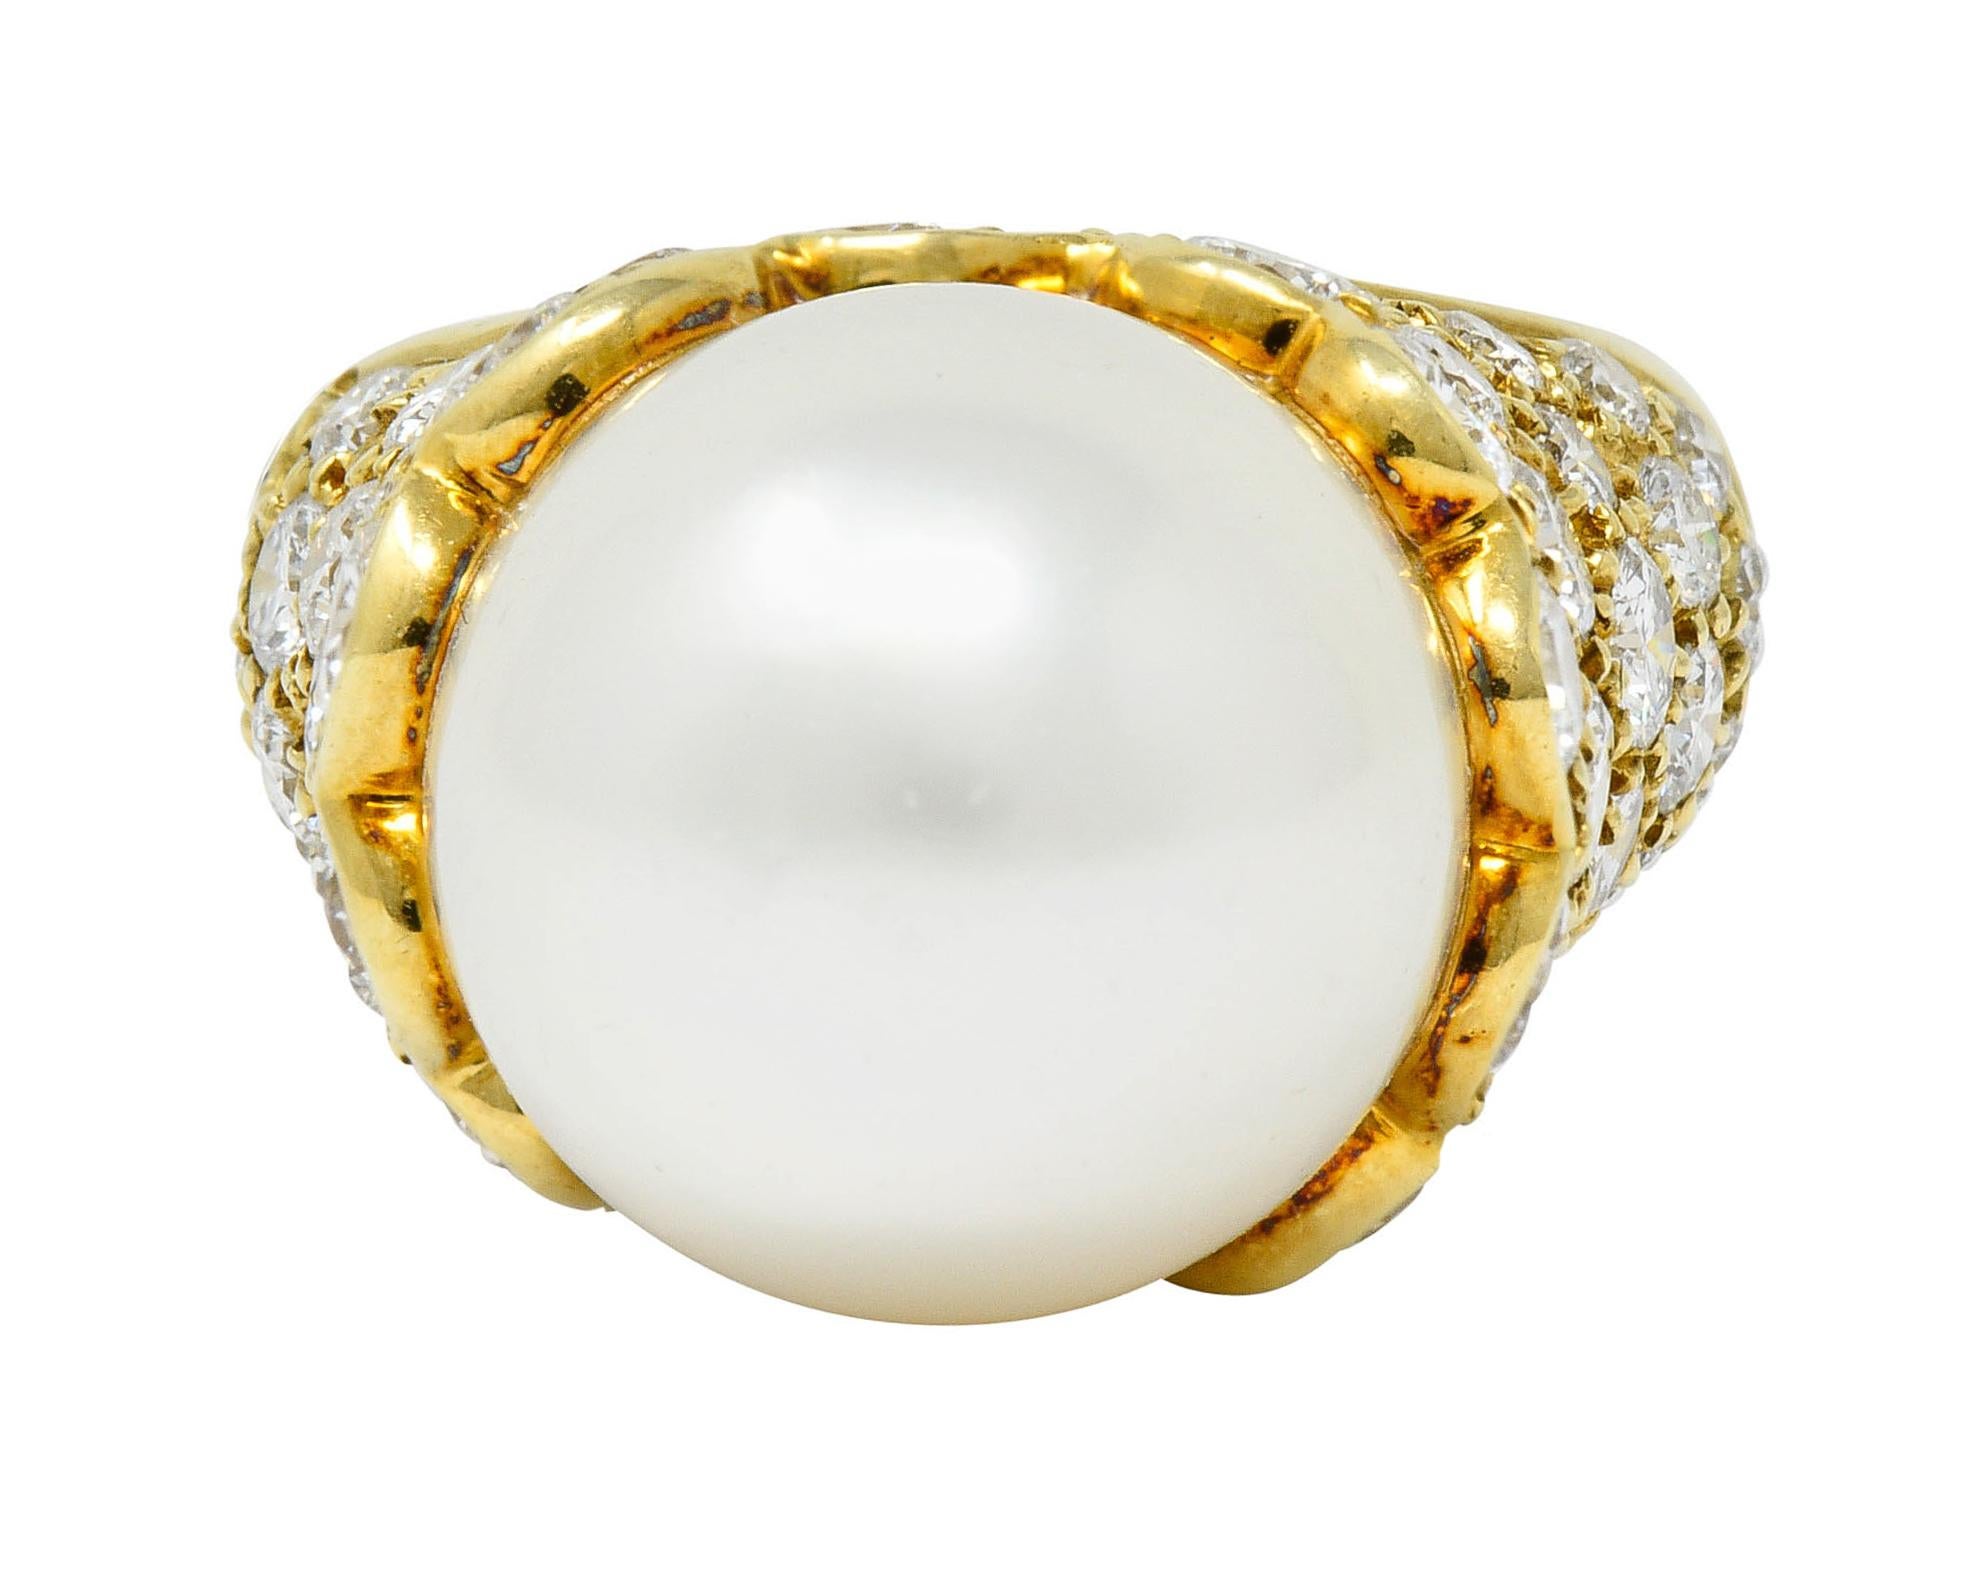 Centering a large 13.0 mm near round South Sea pearl

White in color with strong silvery overtones and subtle purple overtones, excellent in luster

Set in a pavè diamond mounting with an elegantly scalloped edge

Round brilliant cut diamonds weigh